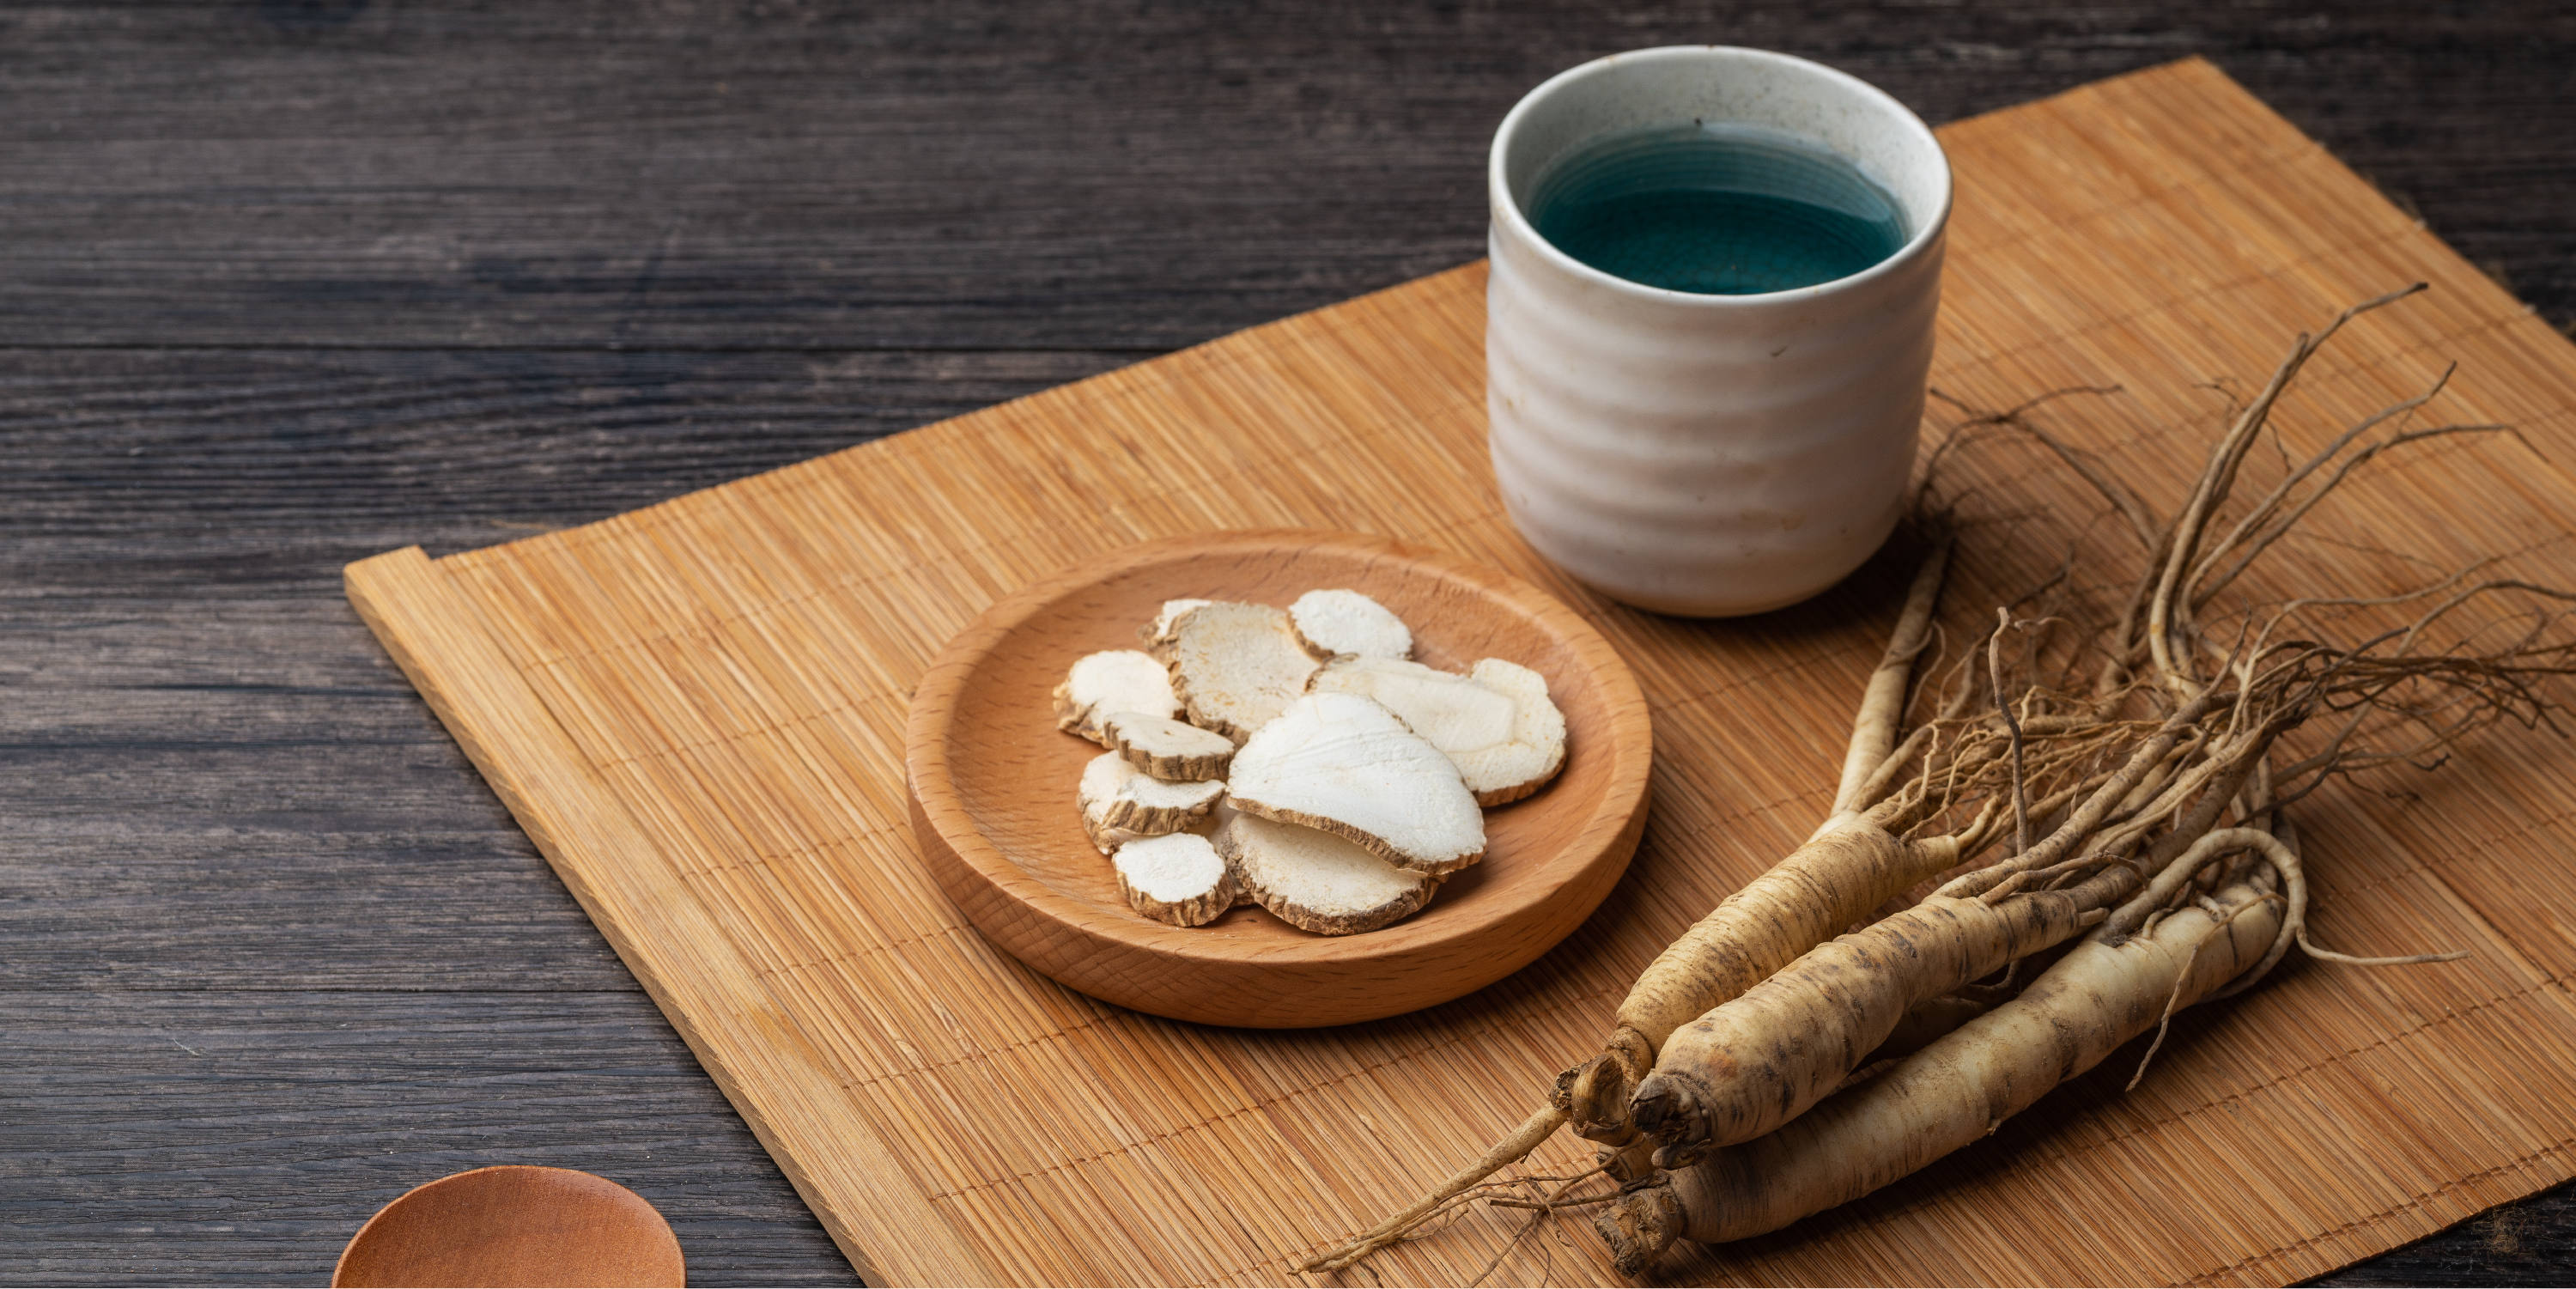 Ginseng entrepreneur discovers the benefits of free trade agreement for his growing business